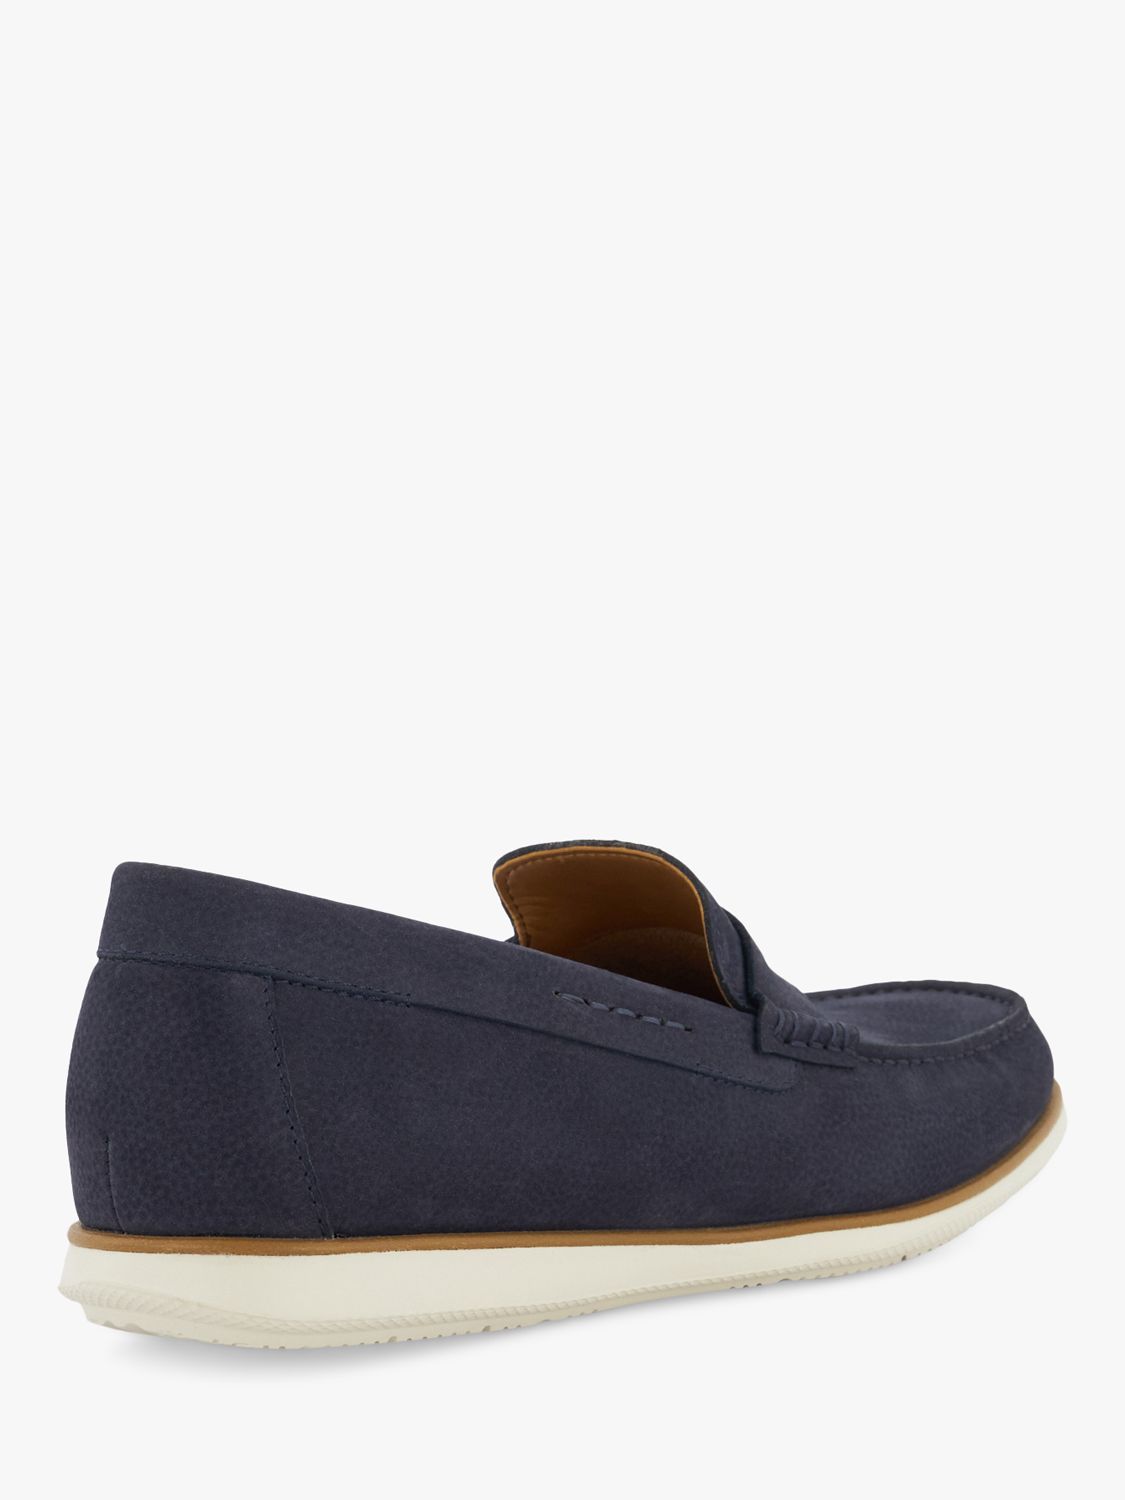 Dune Wide Fit Berkly Nubuck White Sole Loafers, Navy, 11